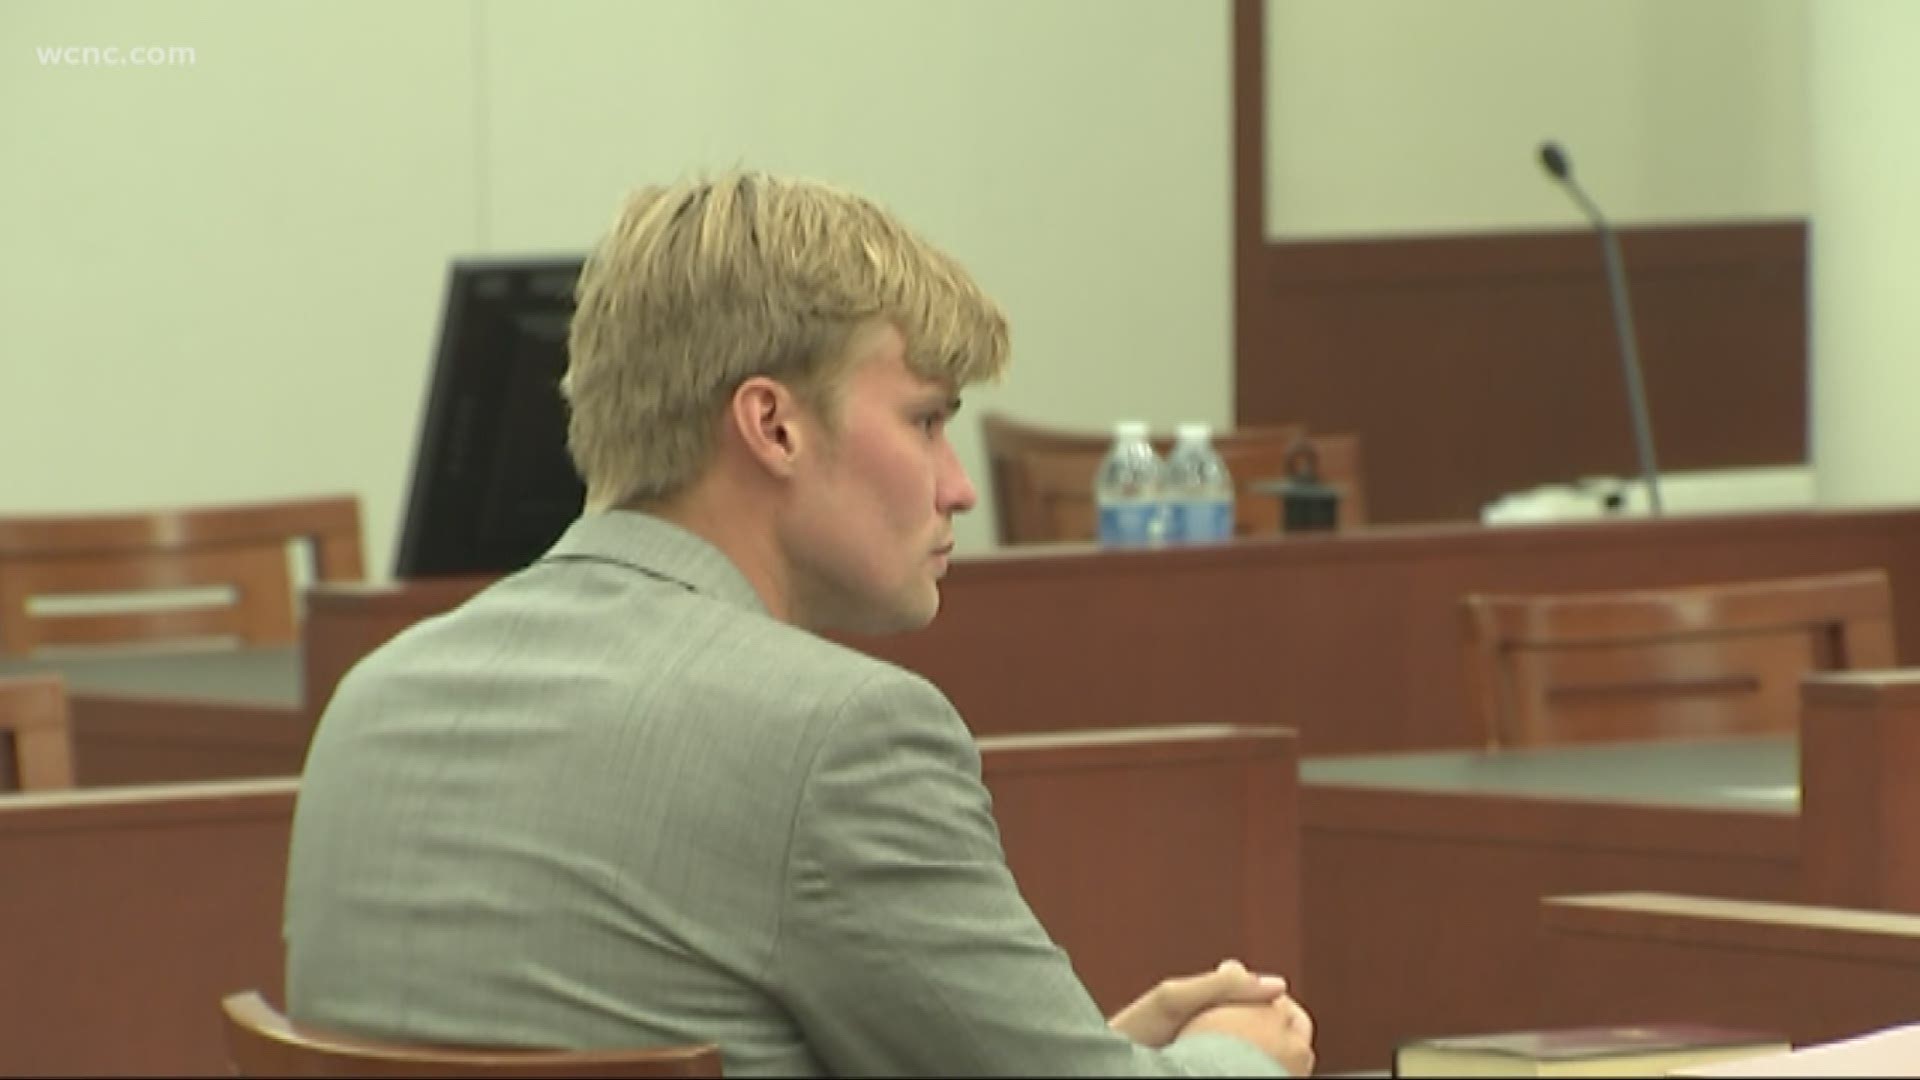 Jurors heard from the nurse who examined the woman who says former UNC Charlotte quarterback Kevin Olsen sexually assaulted her.